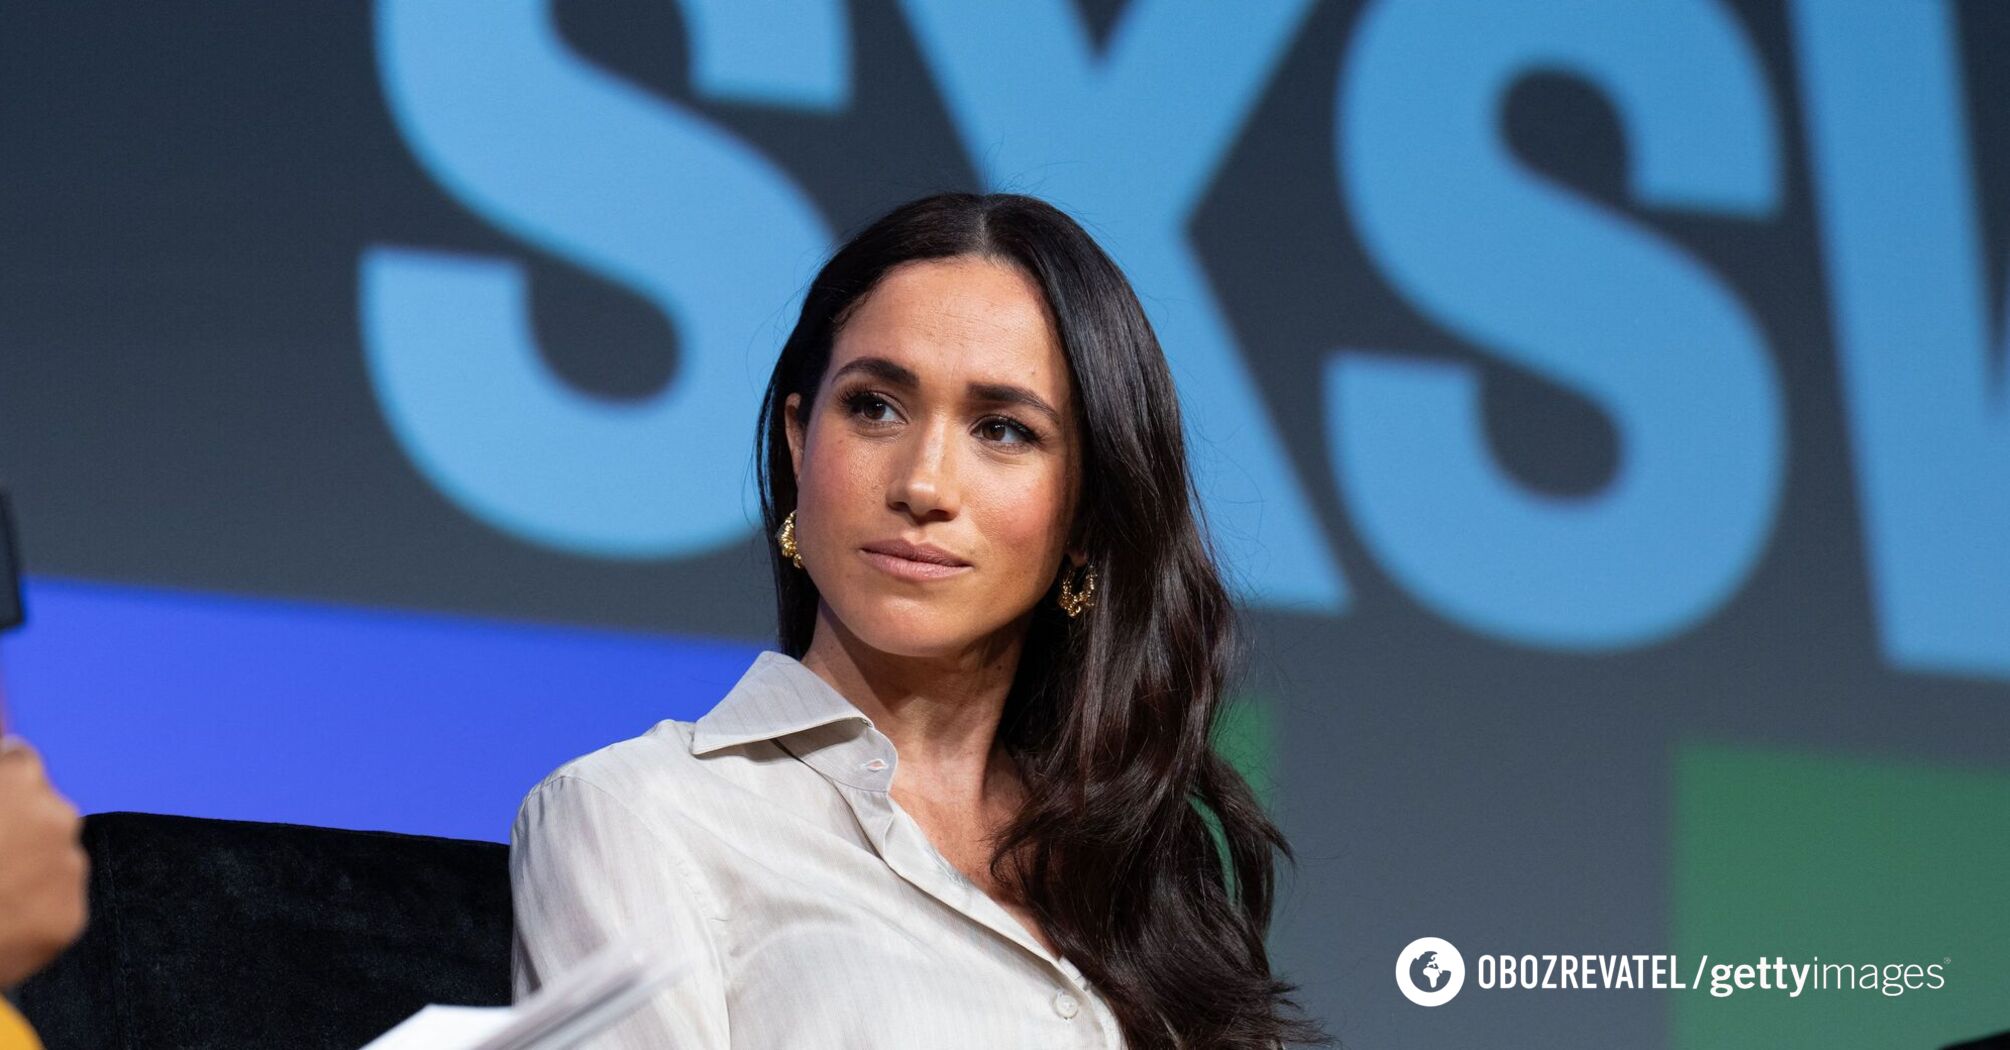 In the same boat as King Charles: why Meghan Markle hasn't spoken to her father in 6 years and still hasn't introduced him to his grandchildren